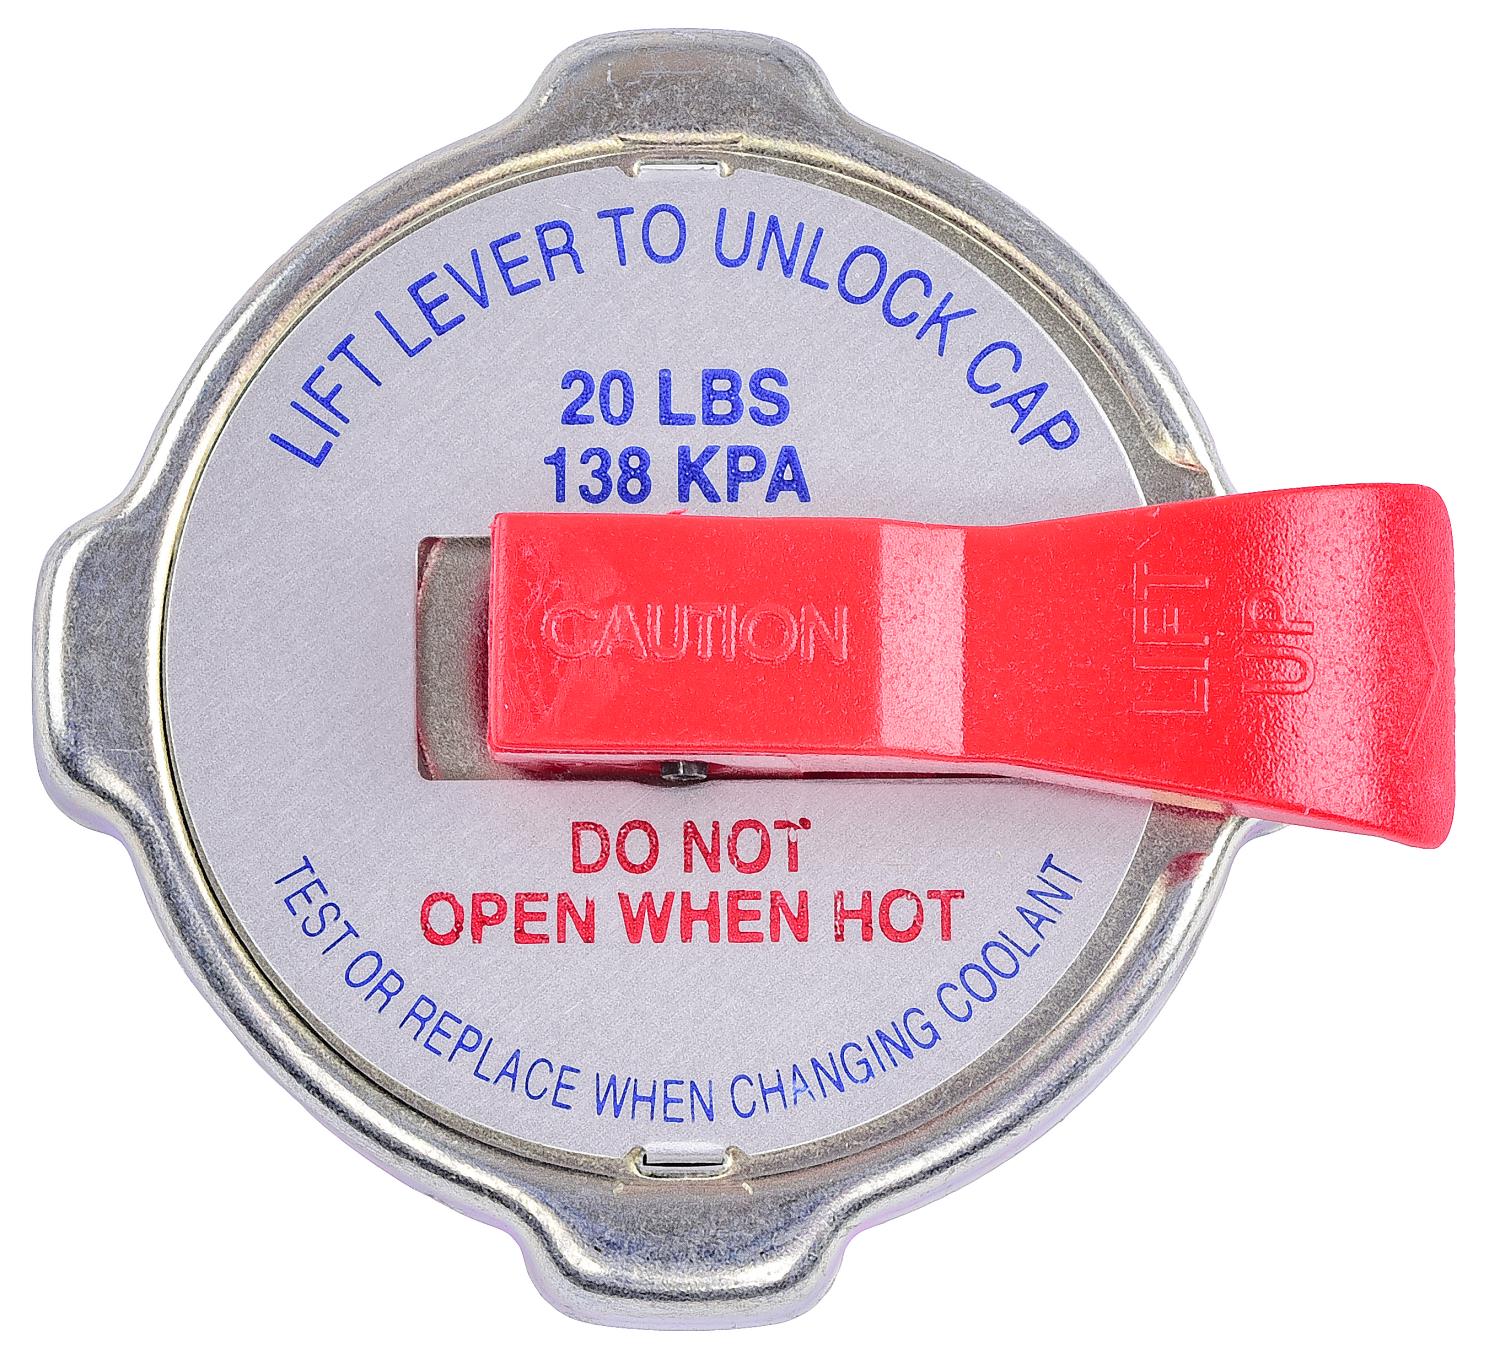 Radiator Cap With Safety Lever [20 psi]